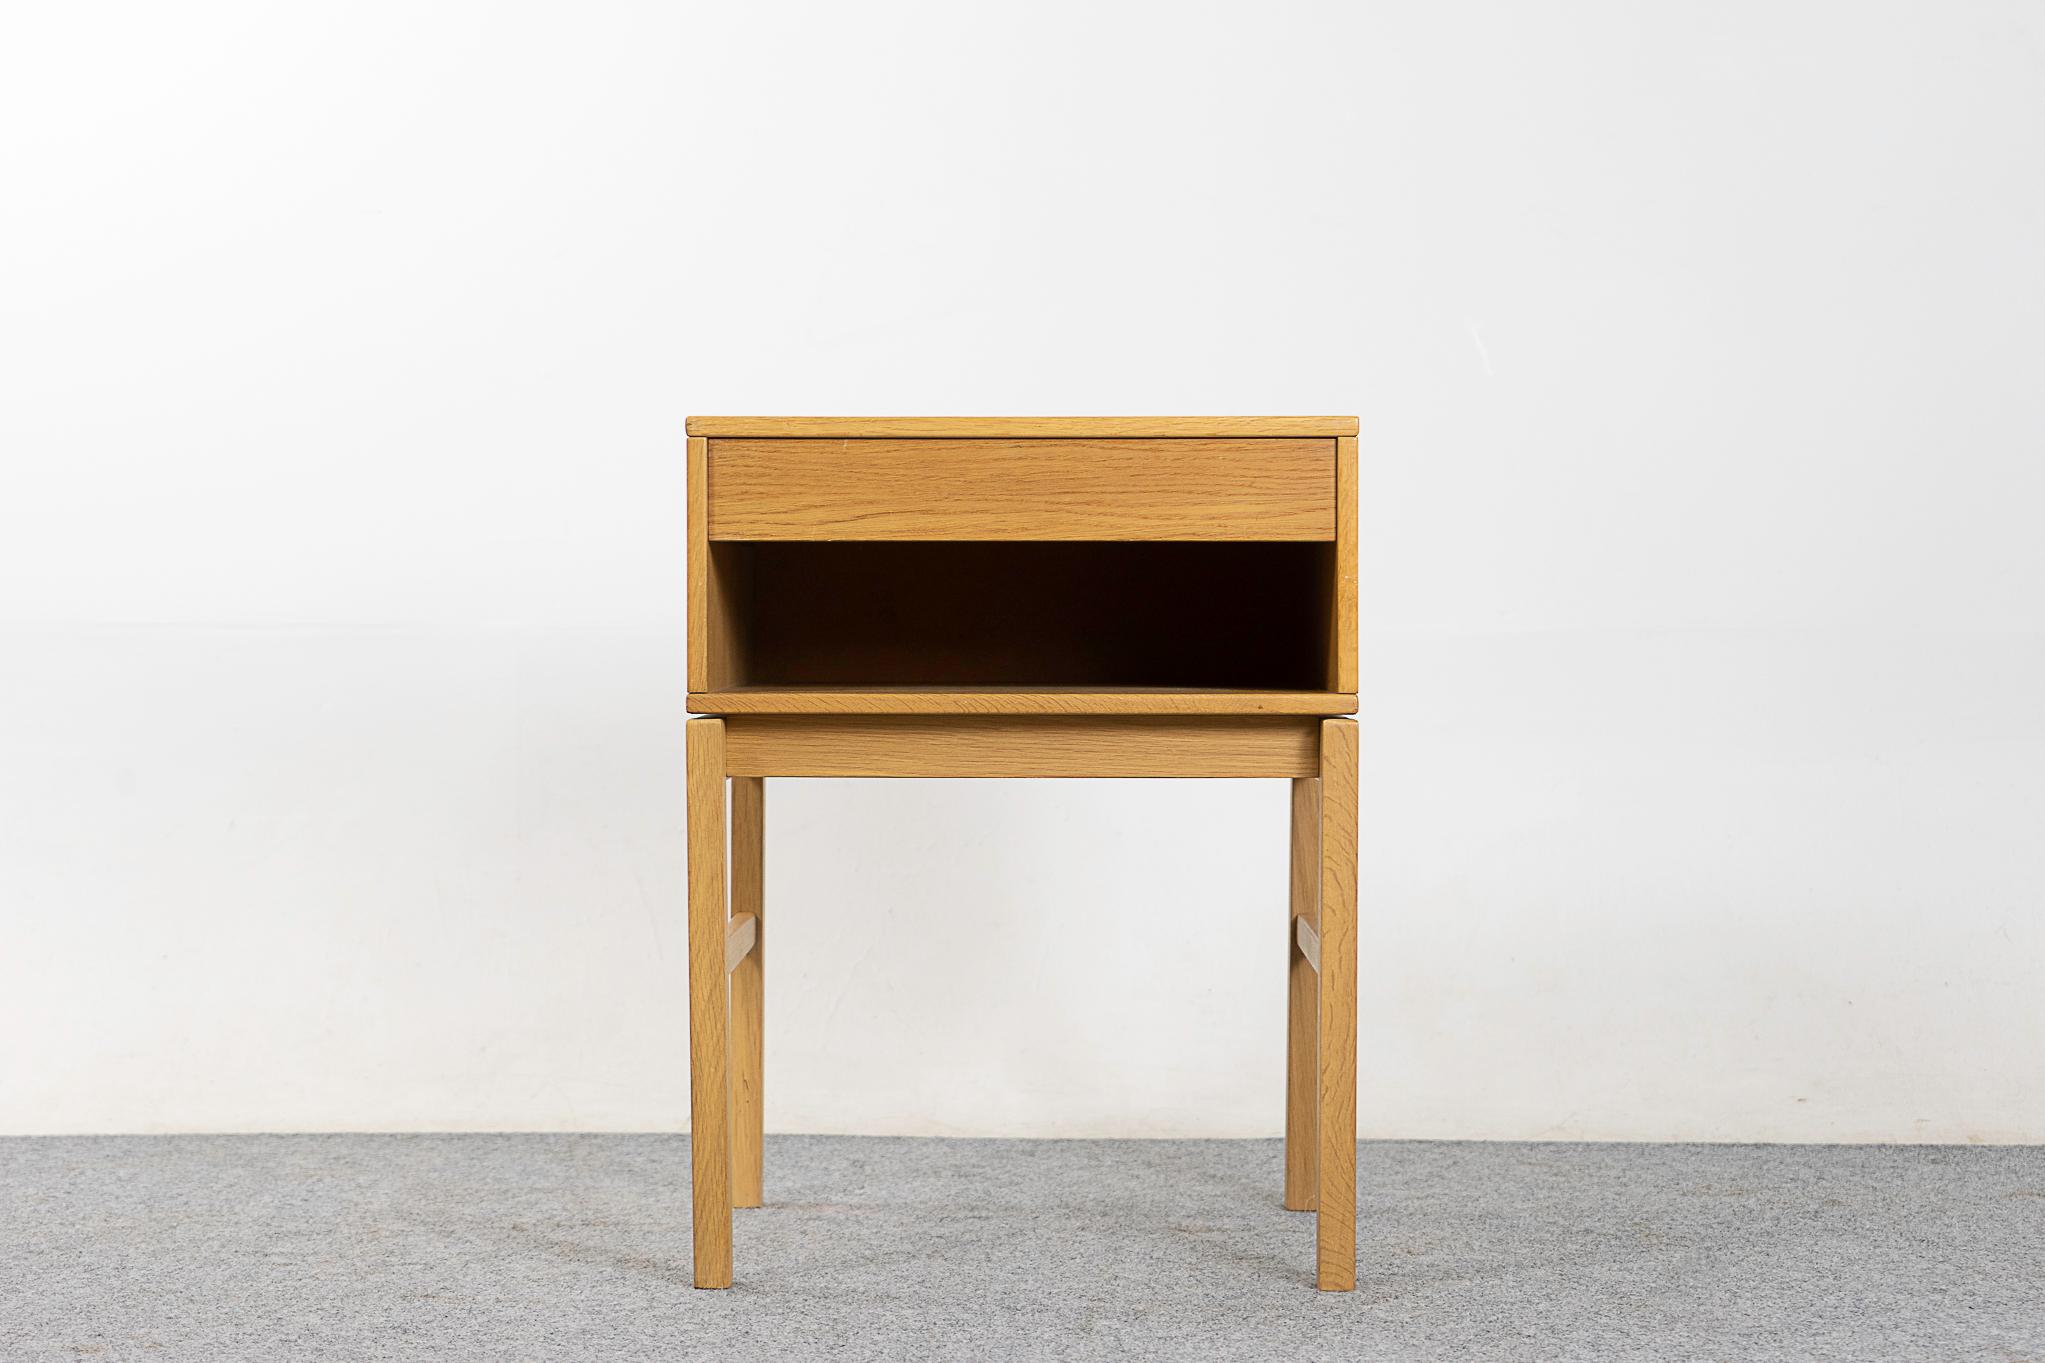 Oak Danish midcentury bedside table, circa 1970s. Dovetailed drawer for small items, an open cubby is perfect for your favorite book. A lovely basic essential.

Unrestored item, some marks consistent with age.

Please inquire for international